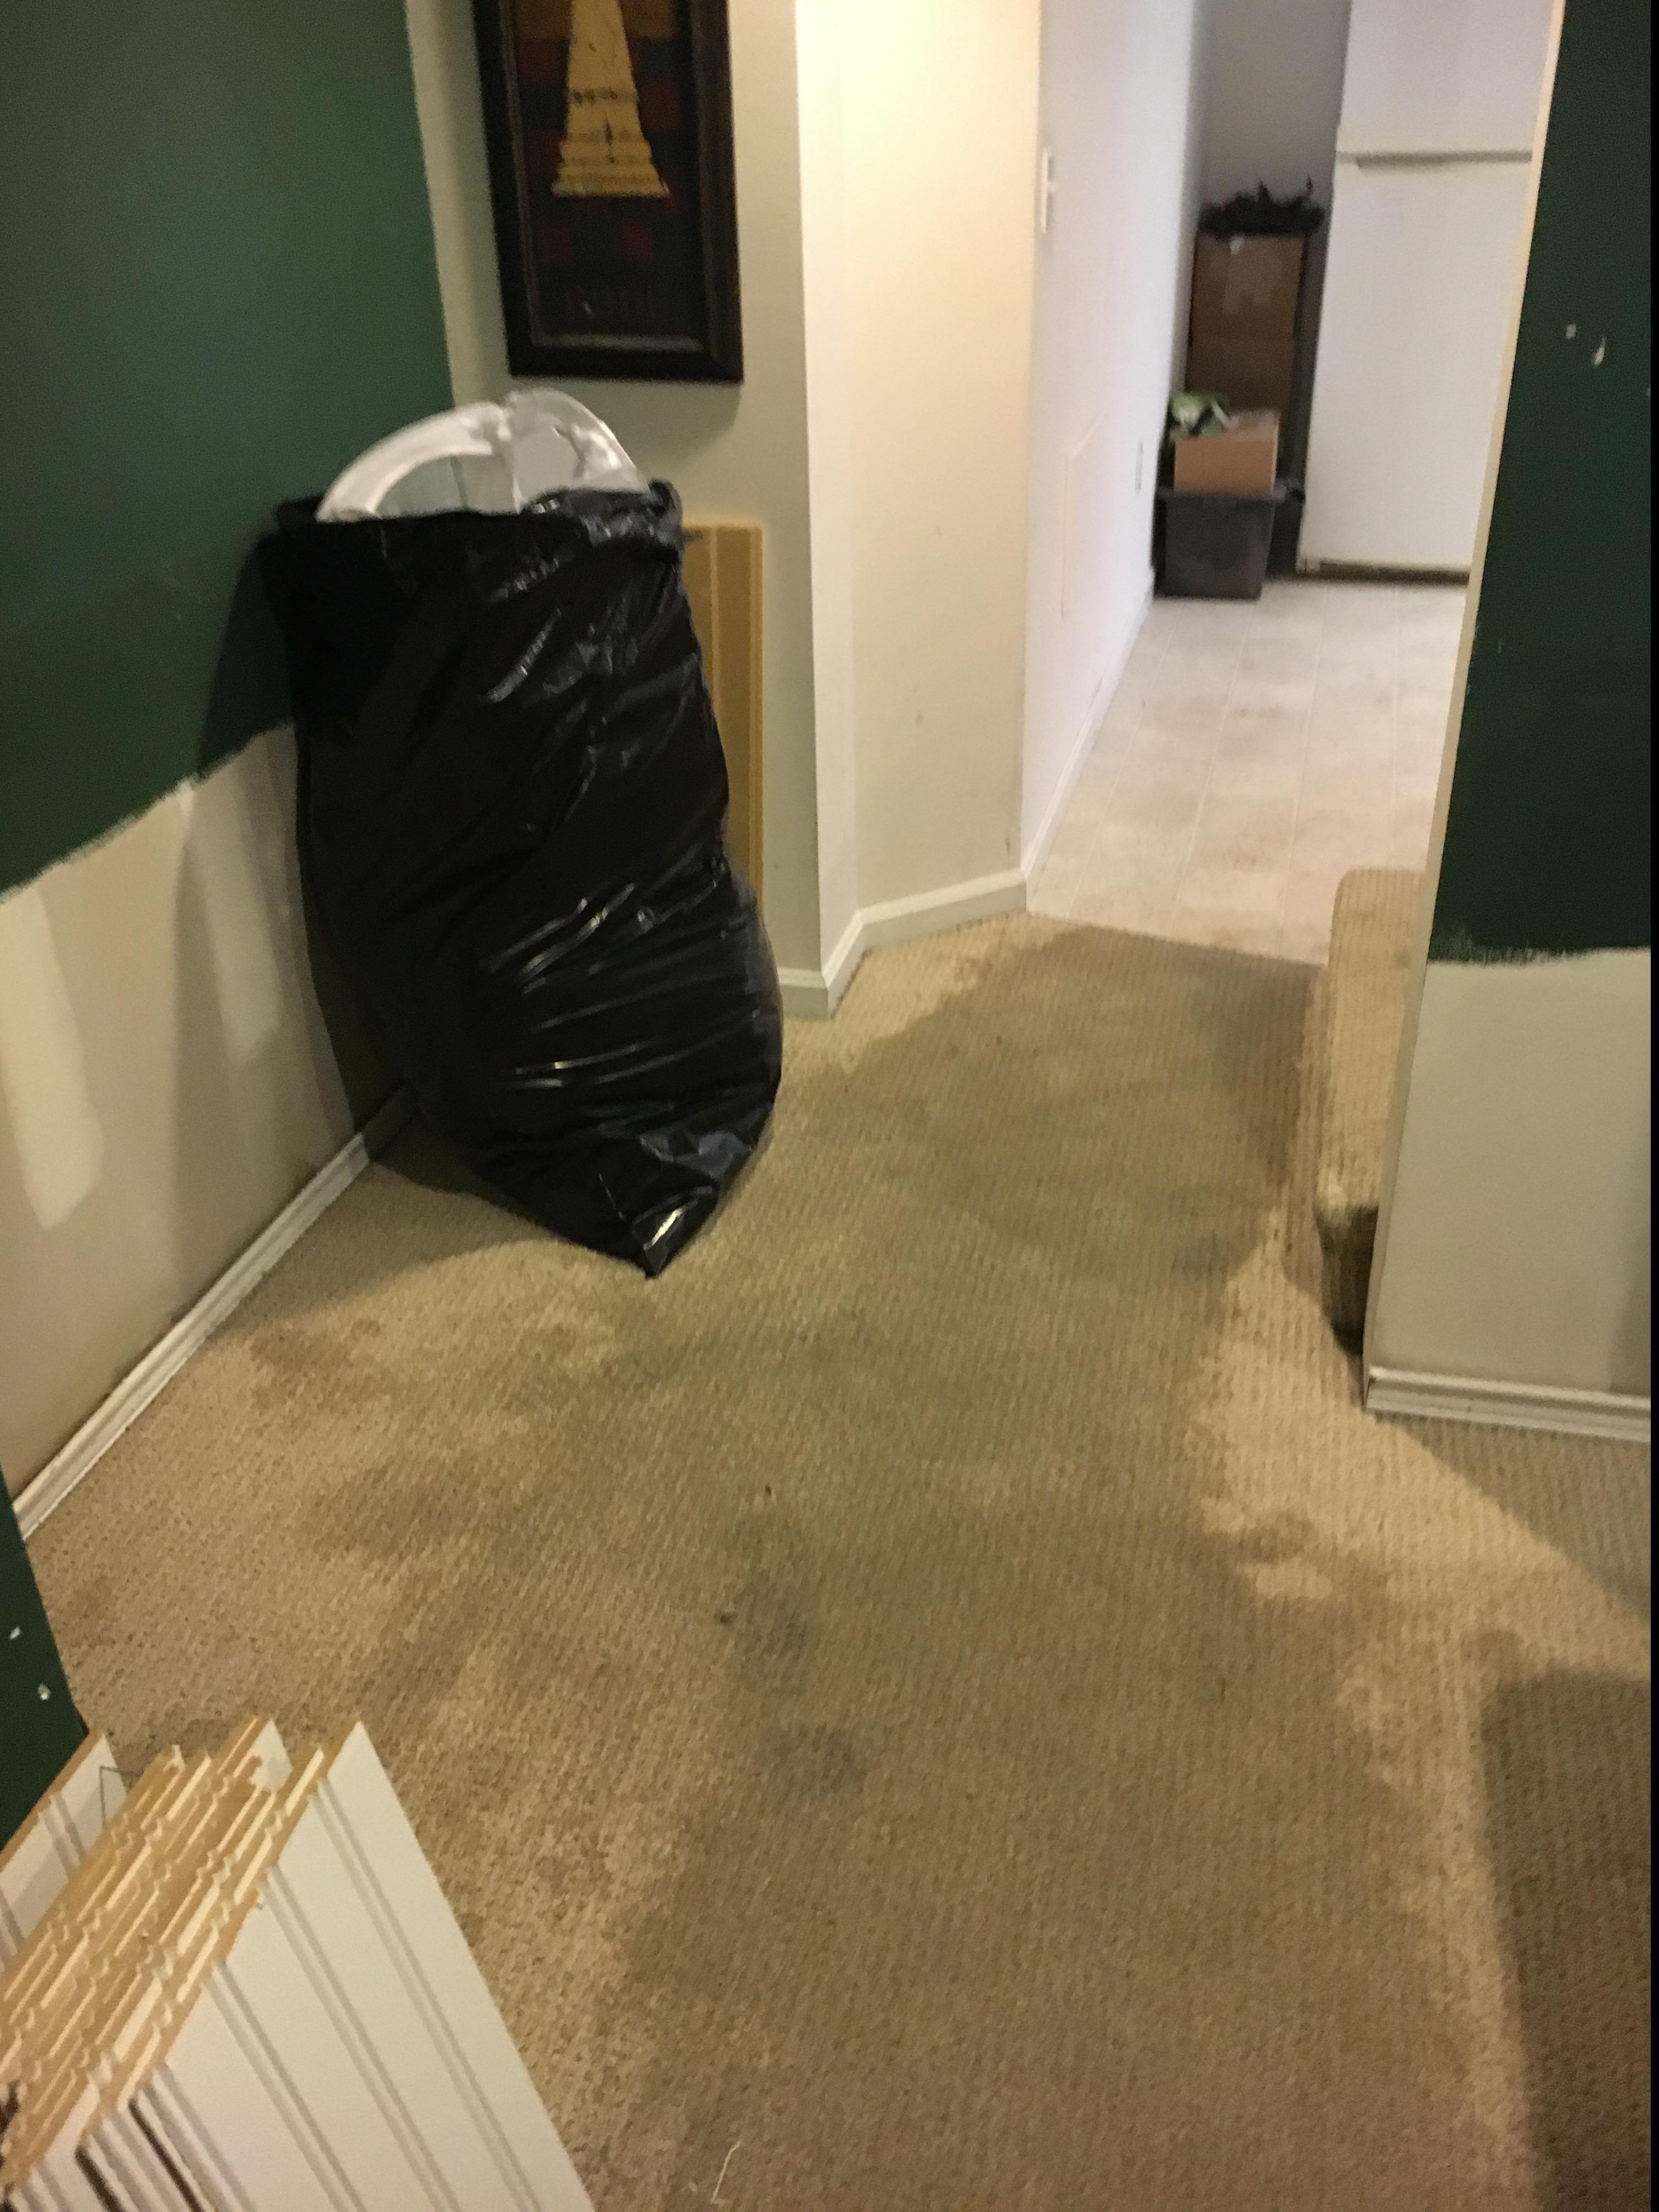 This homes basement experienced water damage after a broken pipe was running for 12 hours. This photo shows the materials bagged up that cannot be restored after the water damage.